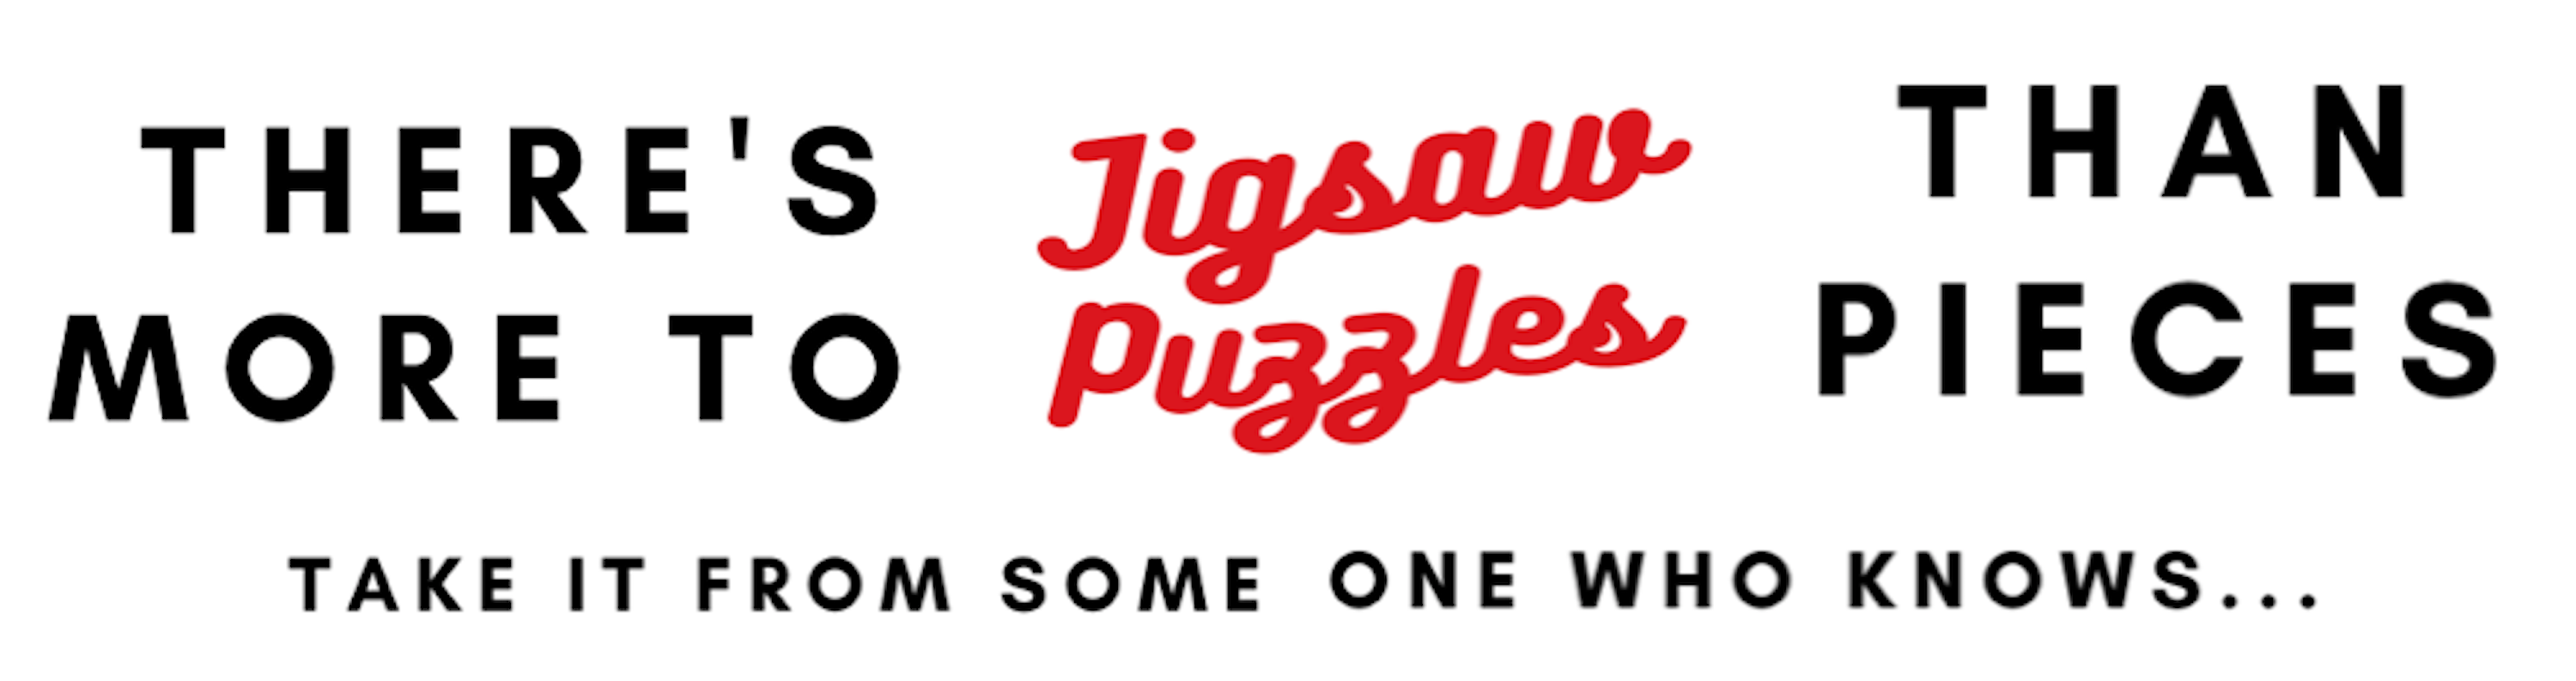 There's More To Jigsaw Puzzles Than Pieces. Take It From Someone Who Knows - Look inside.